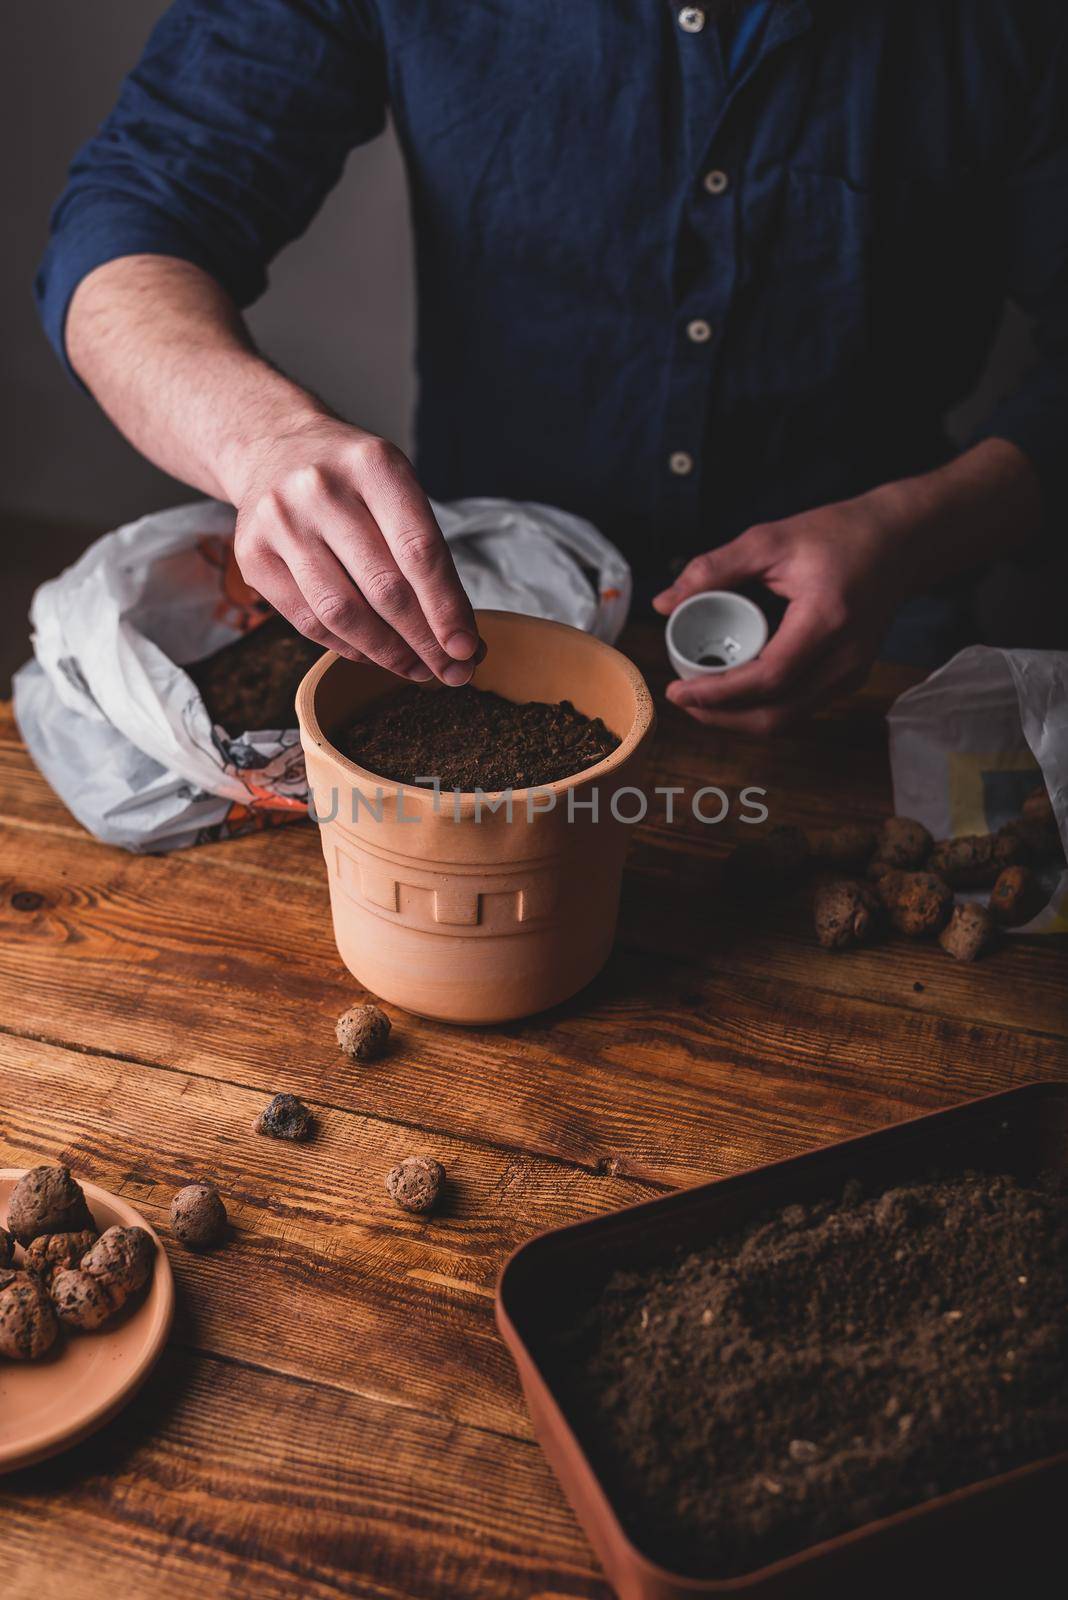 Man Sowing Thyme Seeds into Terracotta Pot by Seva_blsv